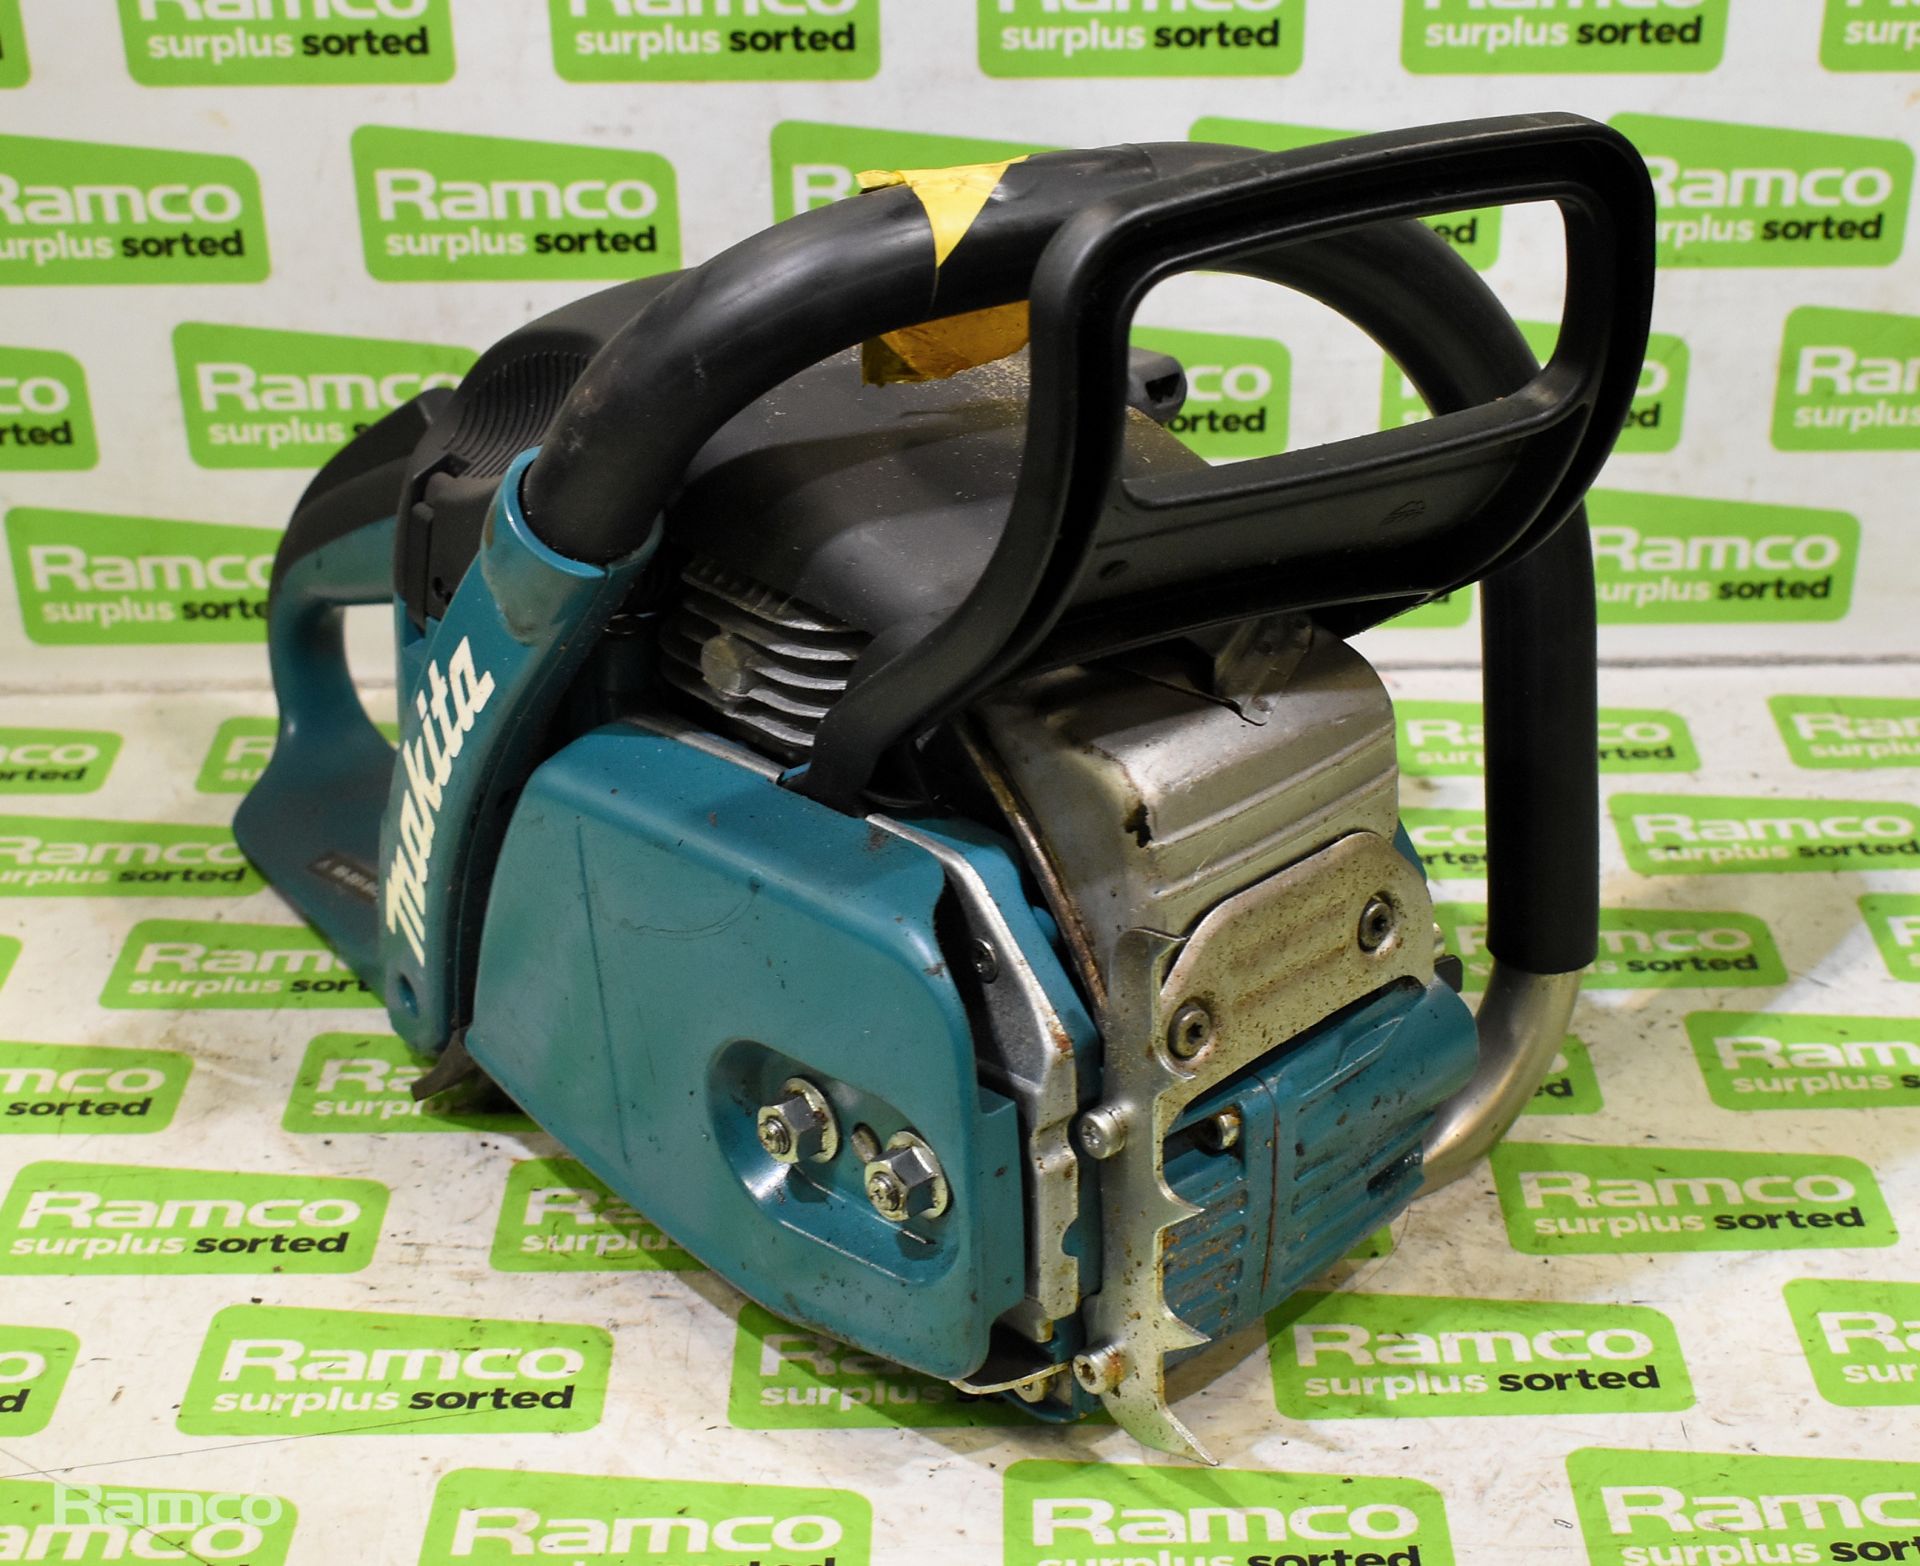 2x Makita DCS5030 50cc petrol chainsaw - BODIES ONLY - AS SPARES AND REPAIRS - Image 8 of 11